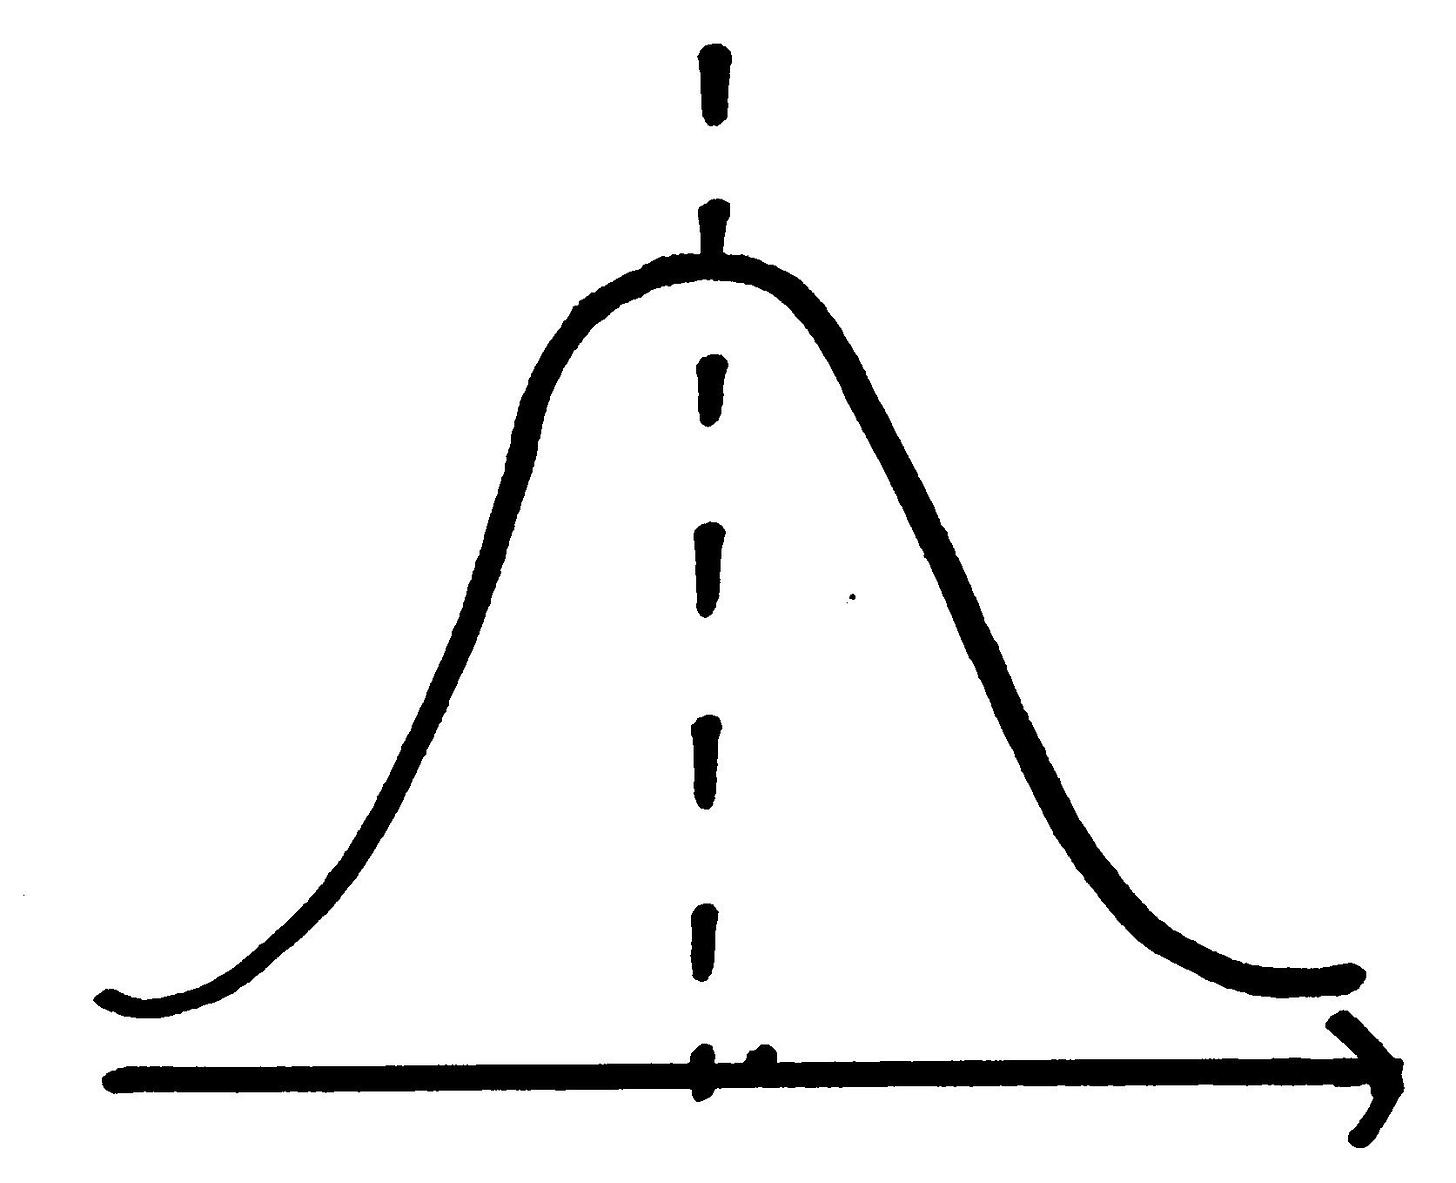 simple hand-drawn graph following normal distribution 'bell curve', with mode of graph highlighted by single dashed line from x-axis towards peak of graph